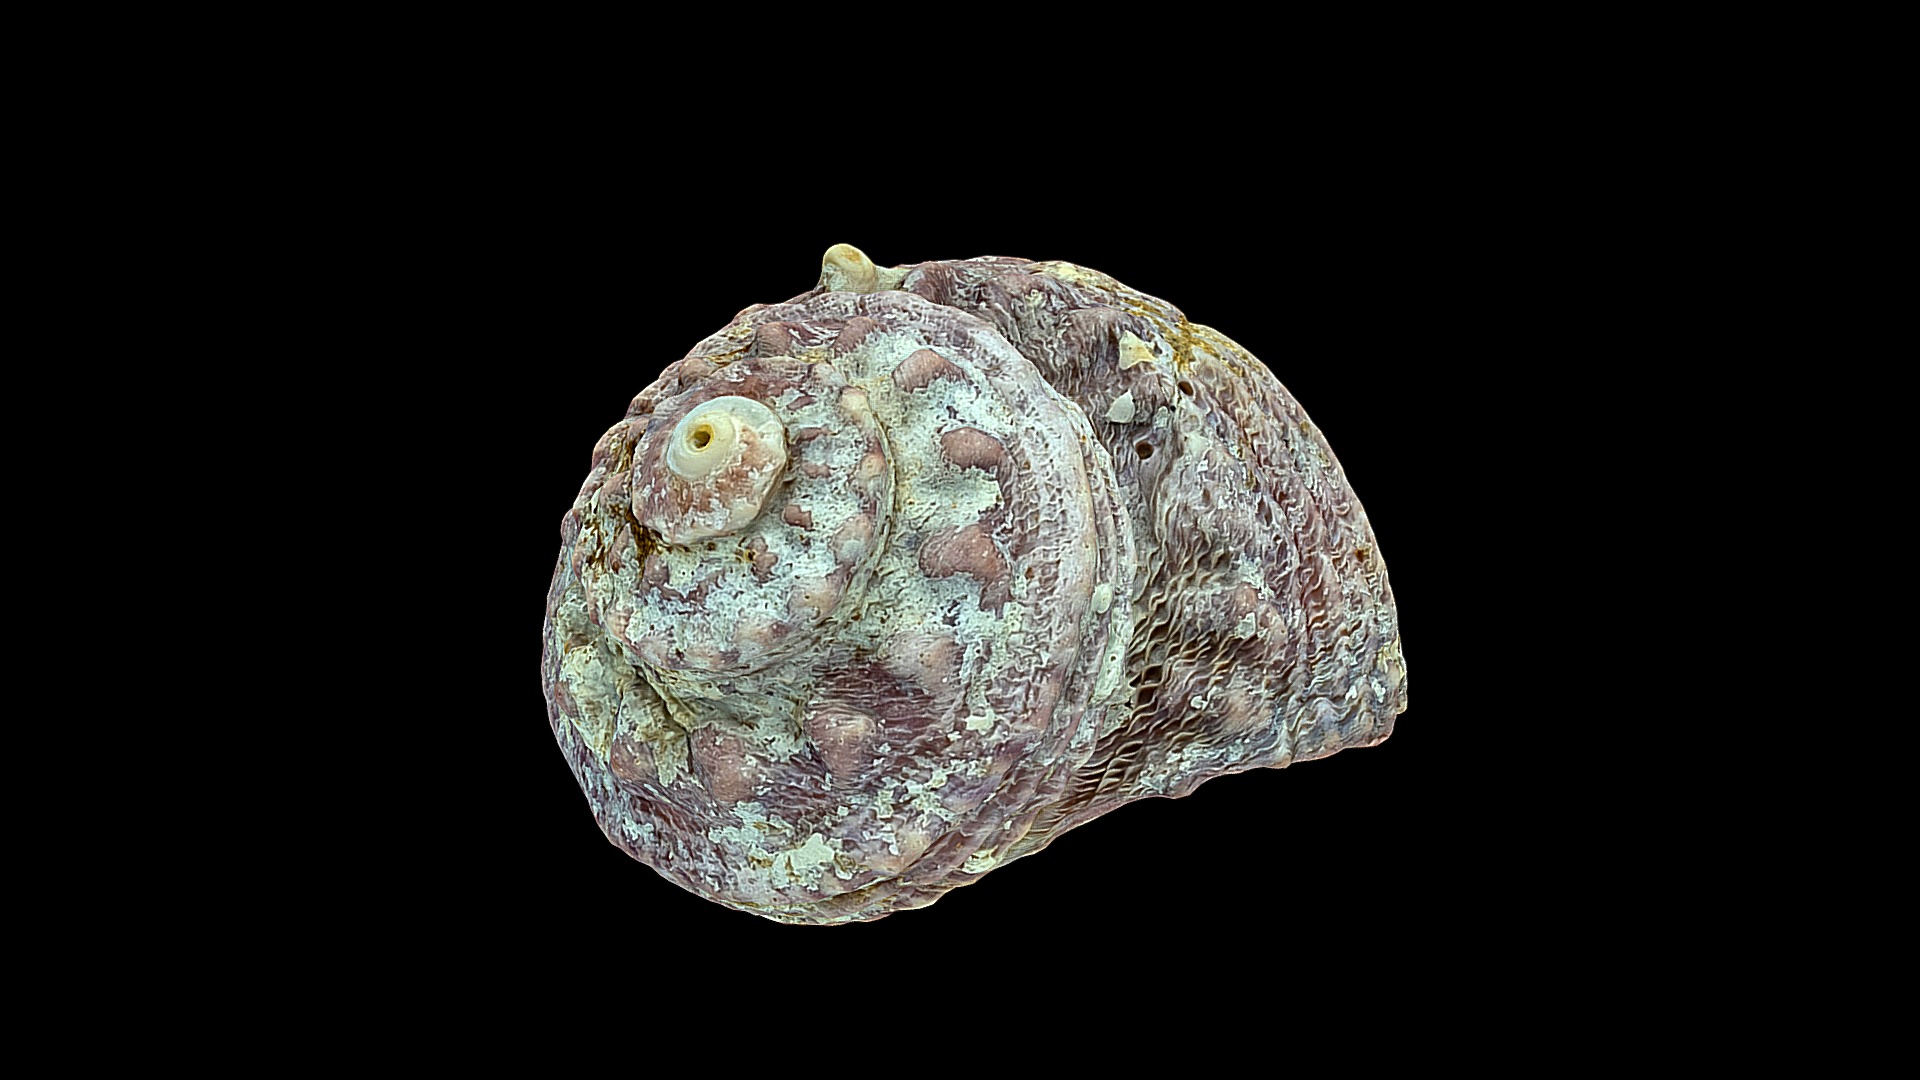 3D model Sea snail shell 1 - This is a 3D model of the Sea snail shell 1. The 3D model is about a close-up of a human brain with Corning Museum of Glass in the background.